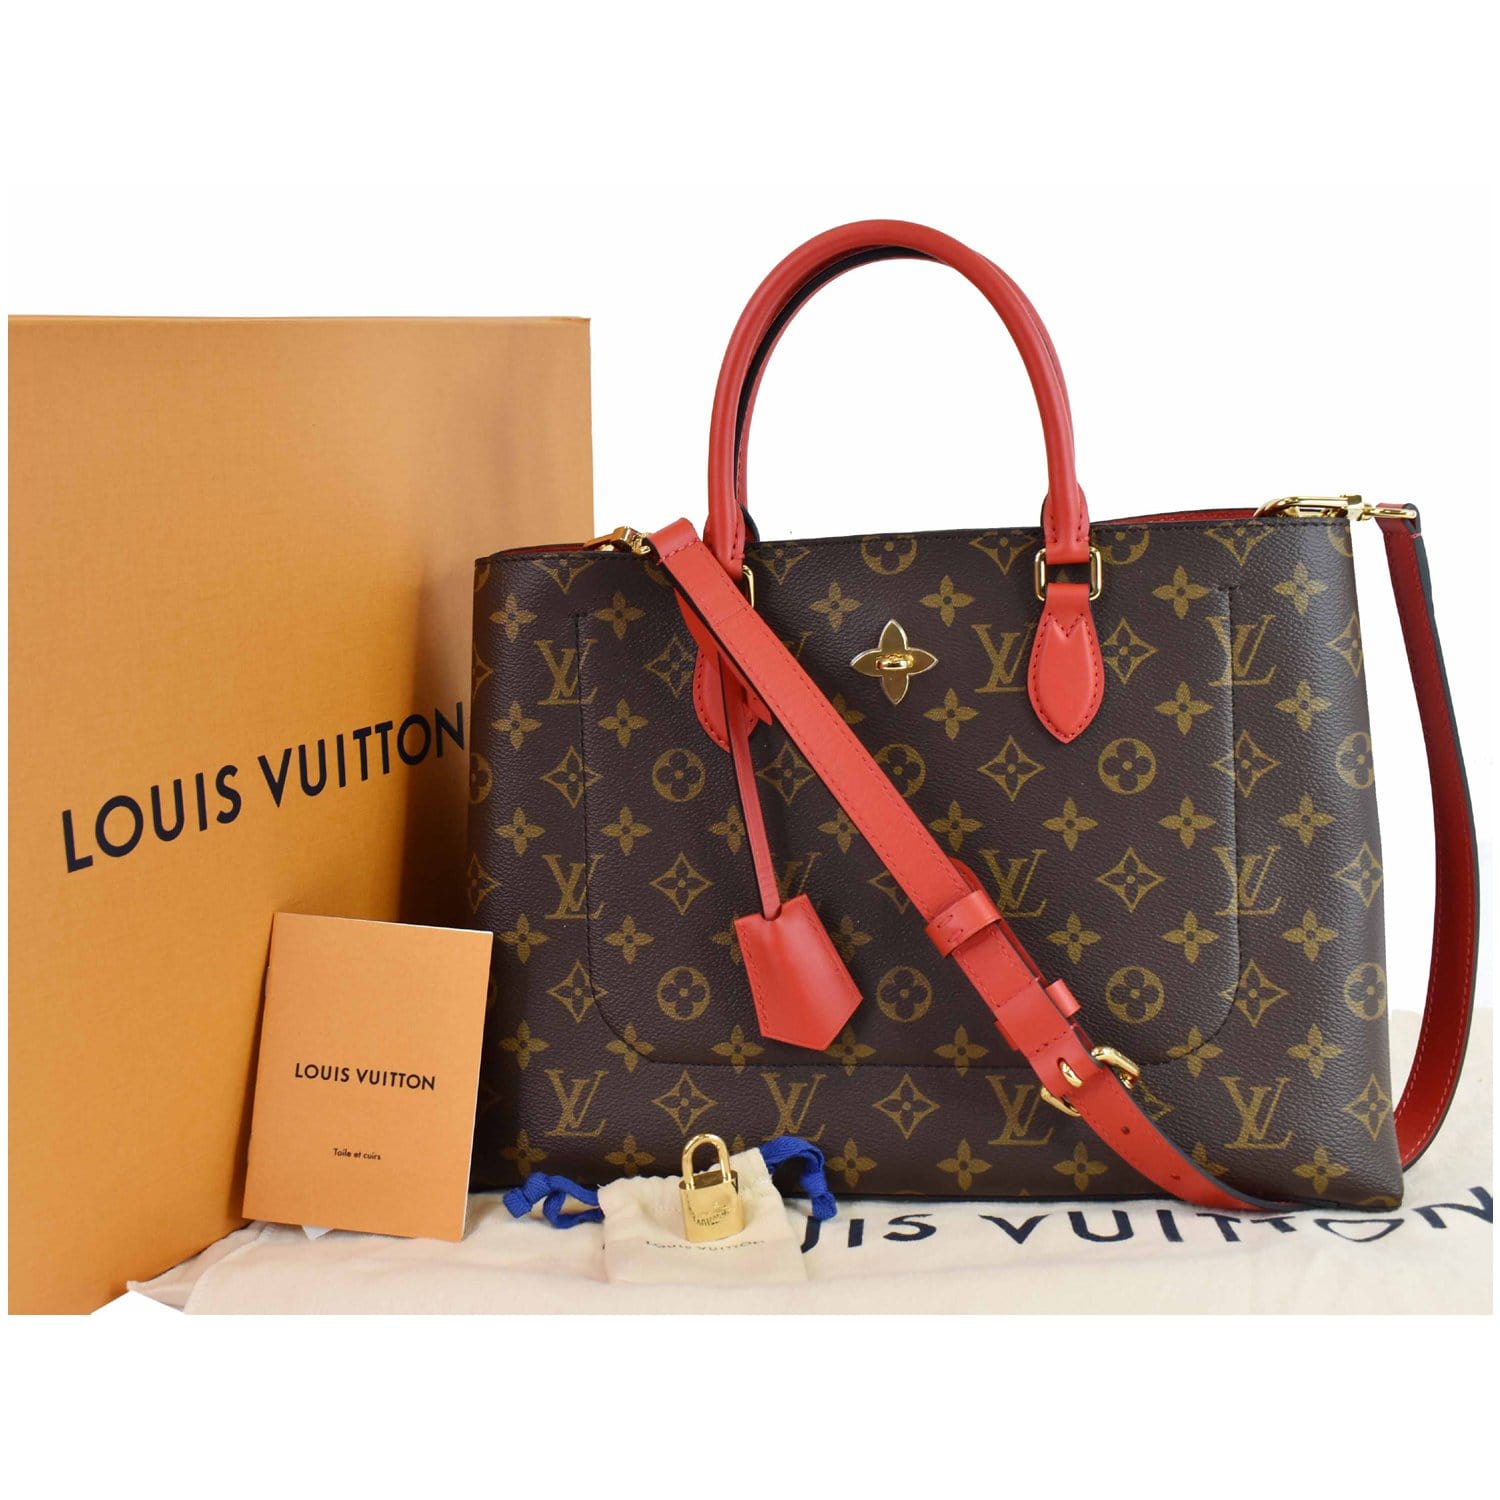 Louis Vuitton - Authenticated Handbag - Cloth Brown Floral for Women, Very Good Condition